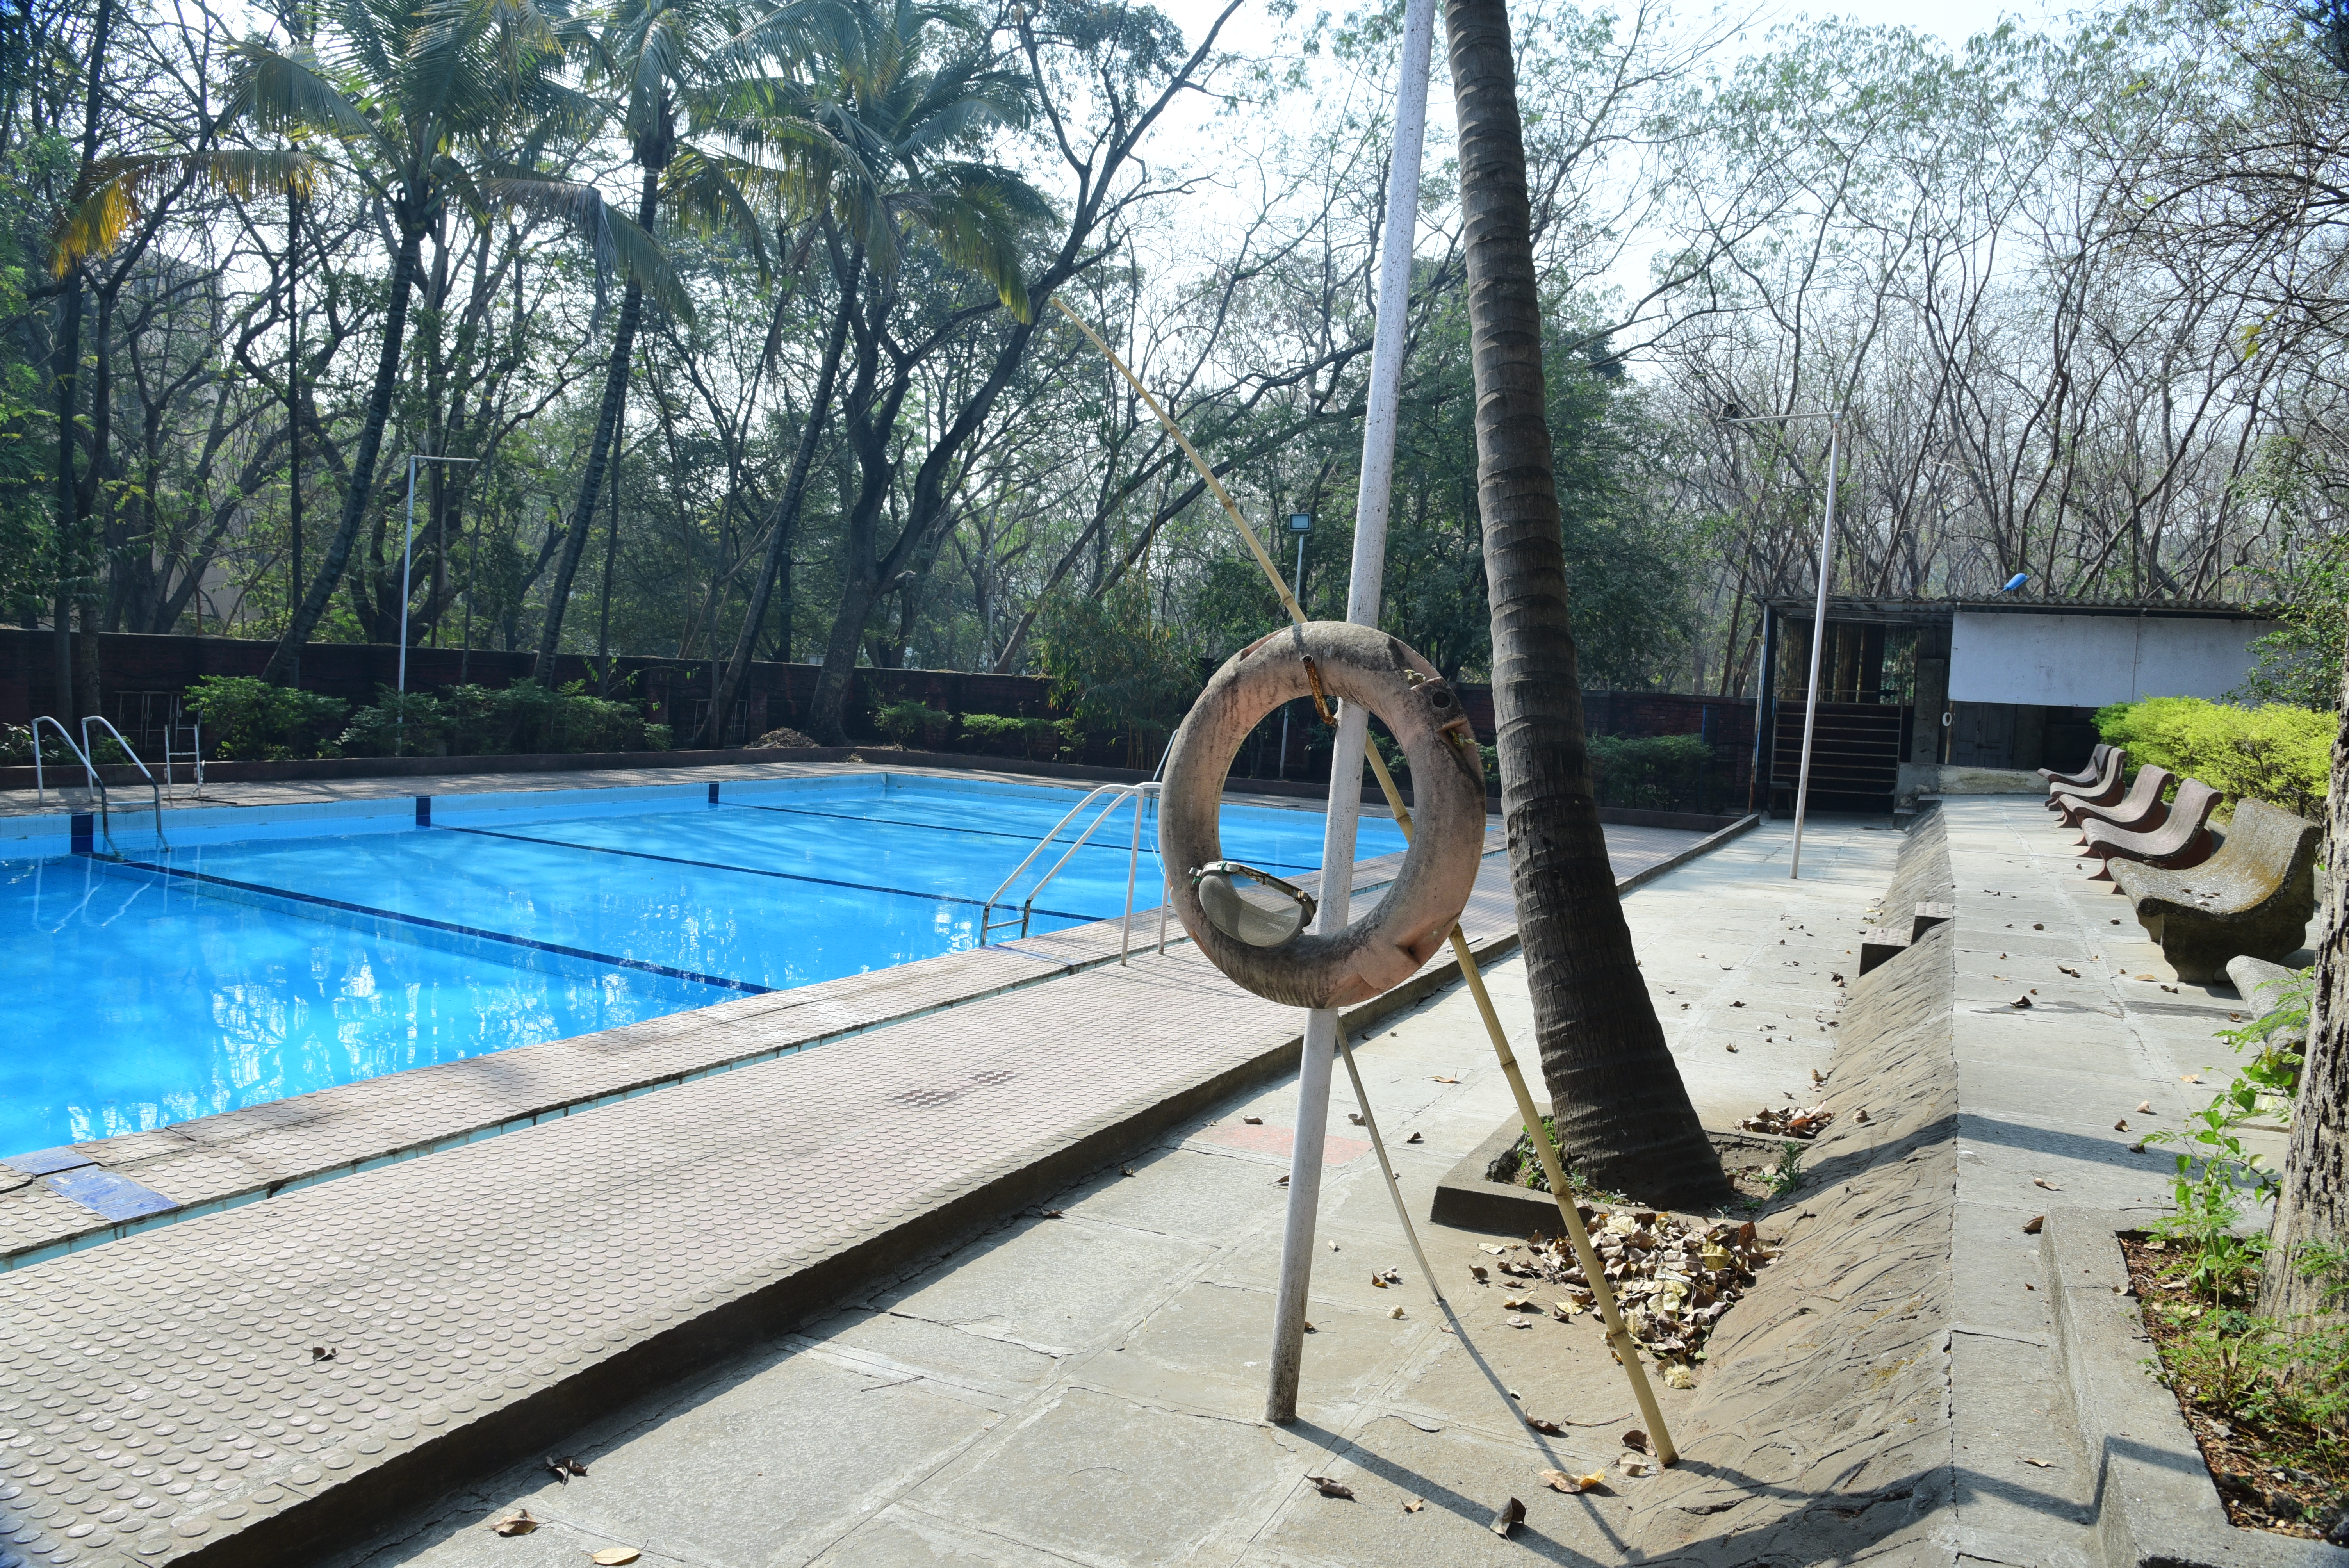 ILS SWIMMING POOL SAFETY EQUIPMENT